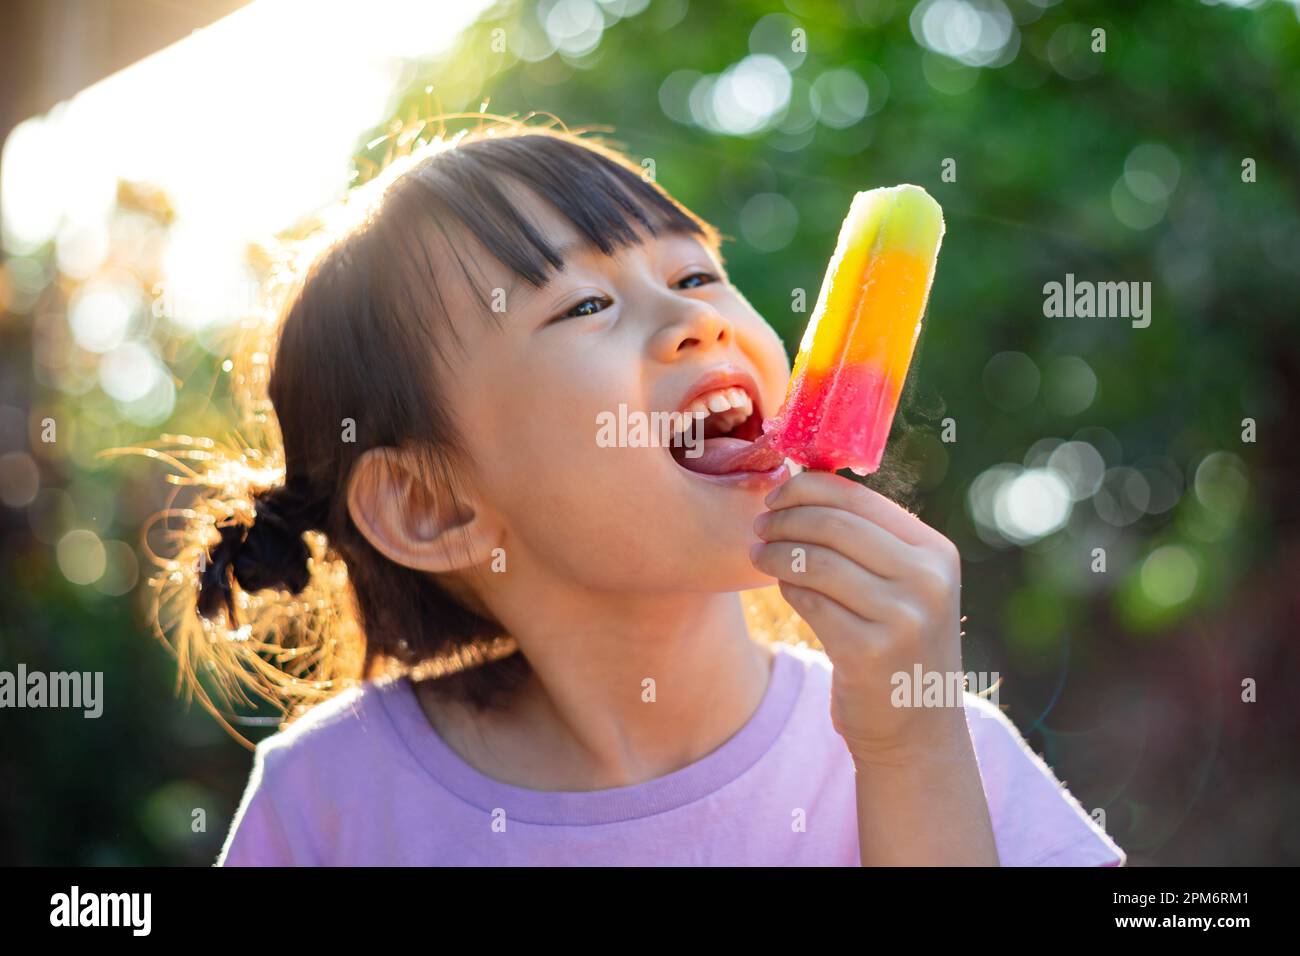 Cute happy baby girl eating ice cream popsicle in summer. Picture for concept of sweet, fat, obesity and diabetes in children. Stock Photo